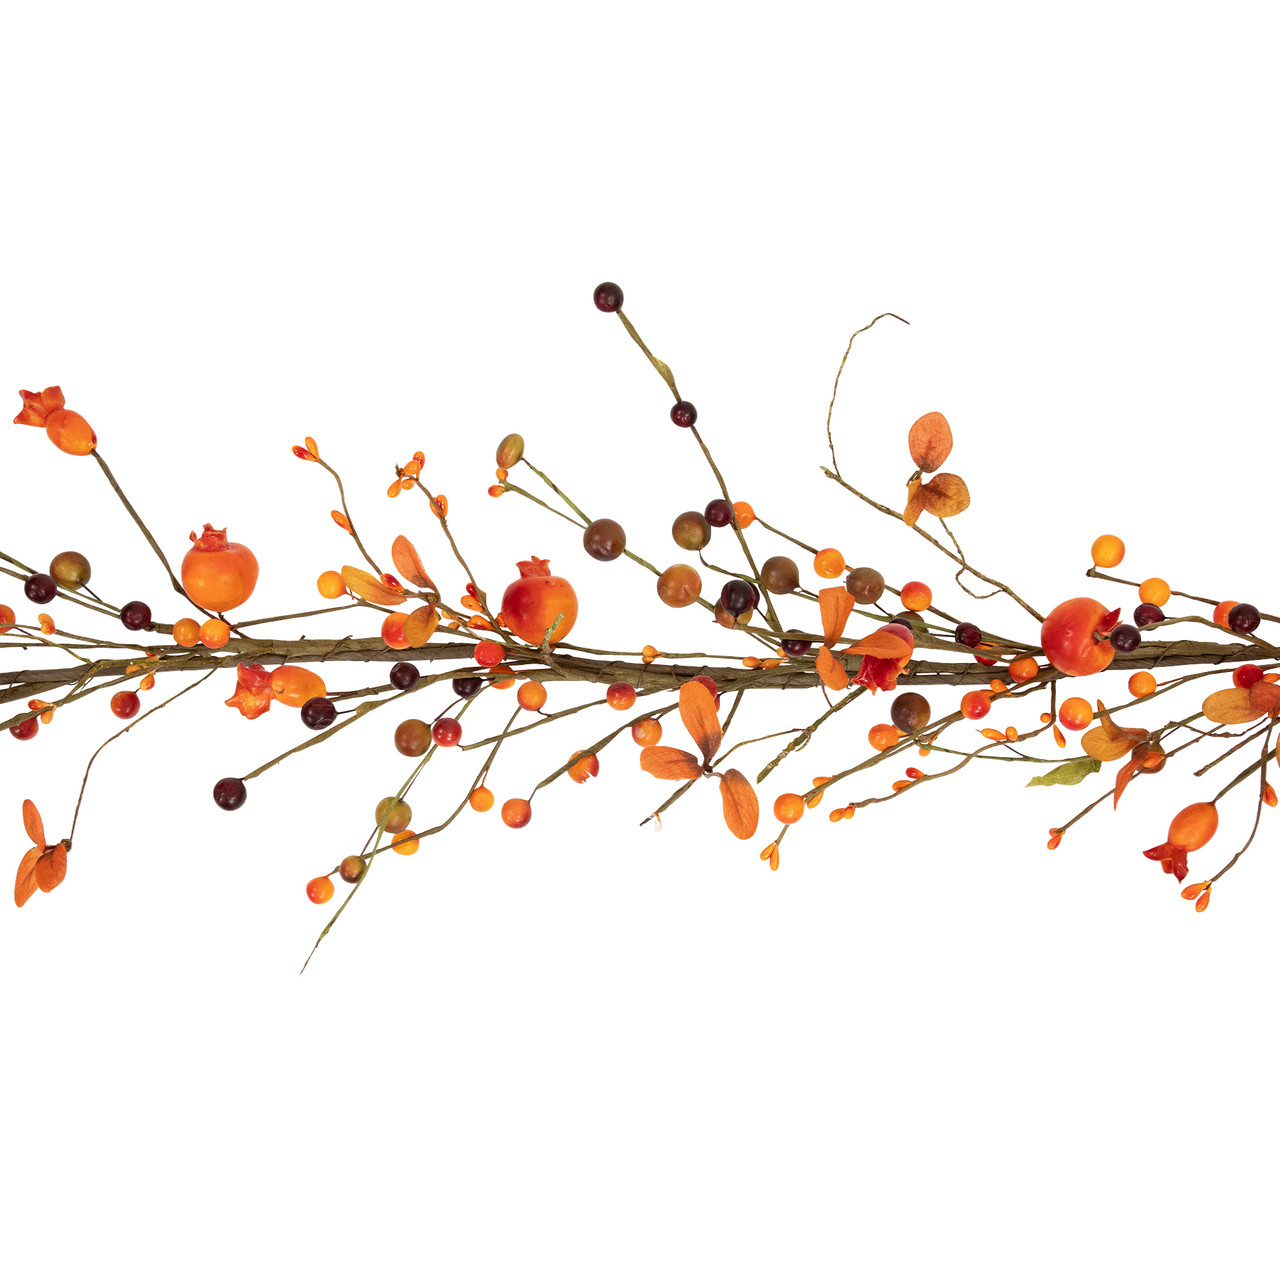 72L Faux Twig Garland w/ Nests, Pinecones & Berries, Multi Color